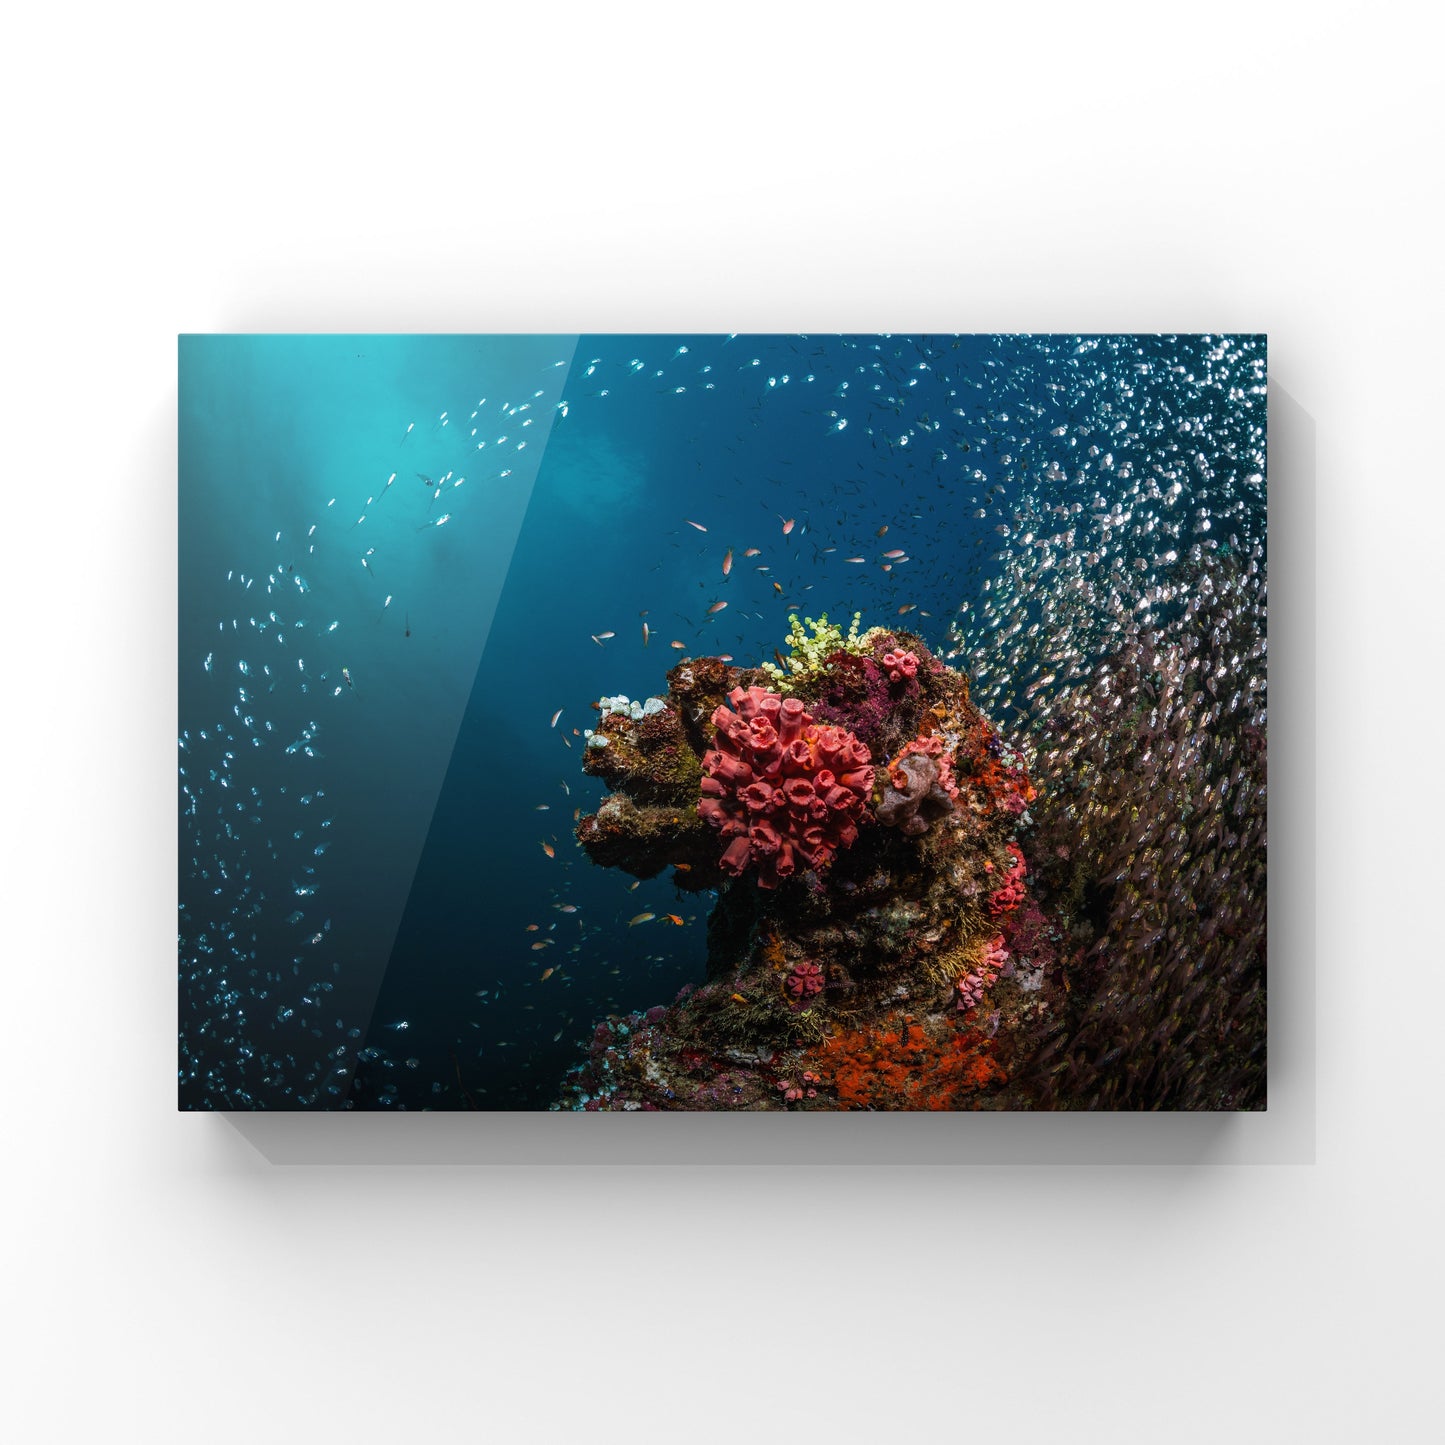 Fine art print: Aqua Ballet: The Dynamic Life of the Coral Reef